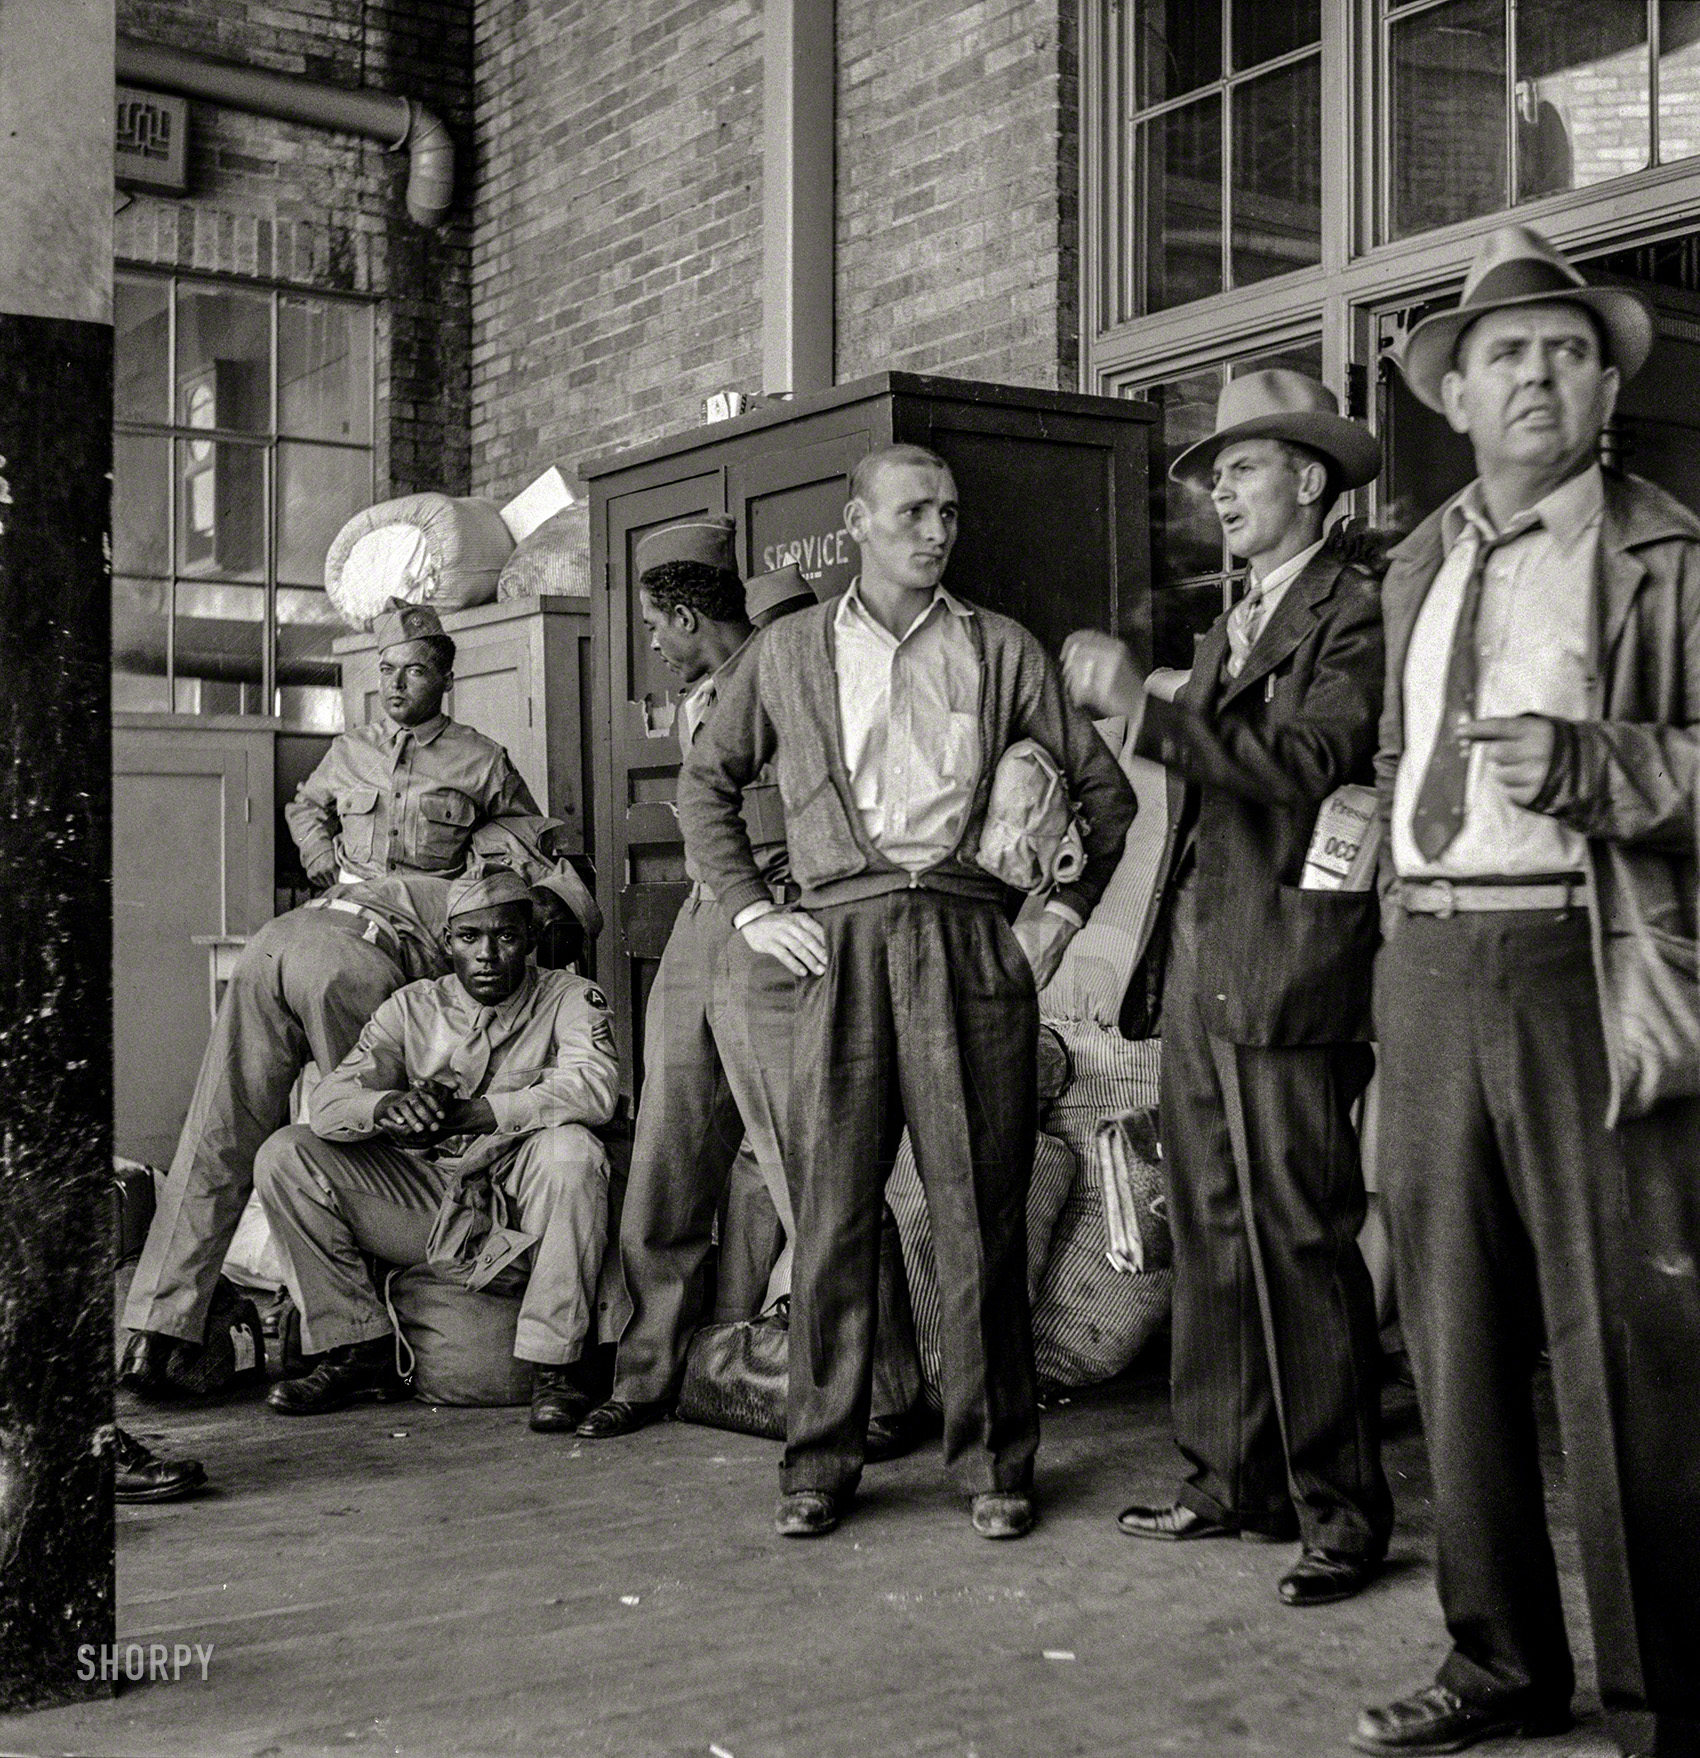 September 1943. "Greyhound bus trip from Louisville, Kentucky, to Memphis, Tennessee, and the terminals. Waiting for a bus at the Memphis station." Photo by Esther Bubley for the Office of War Information. View full size.